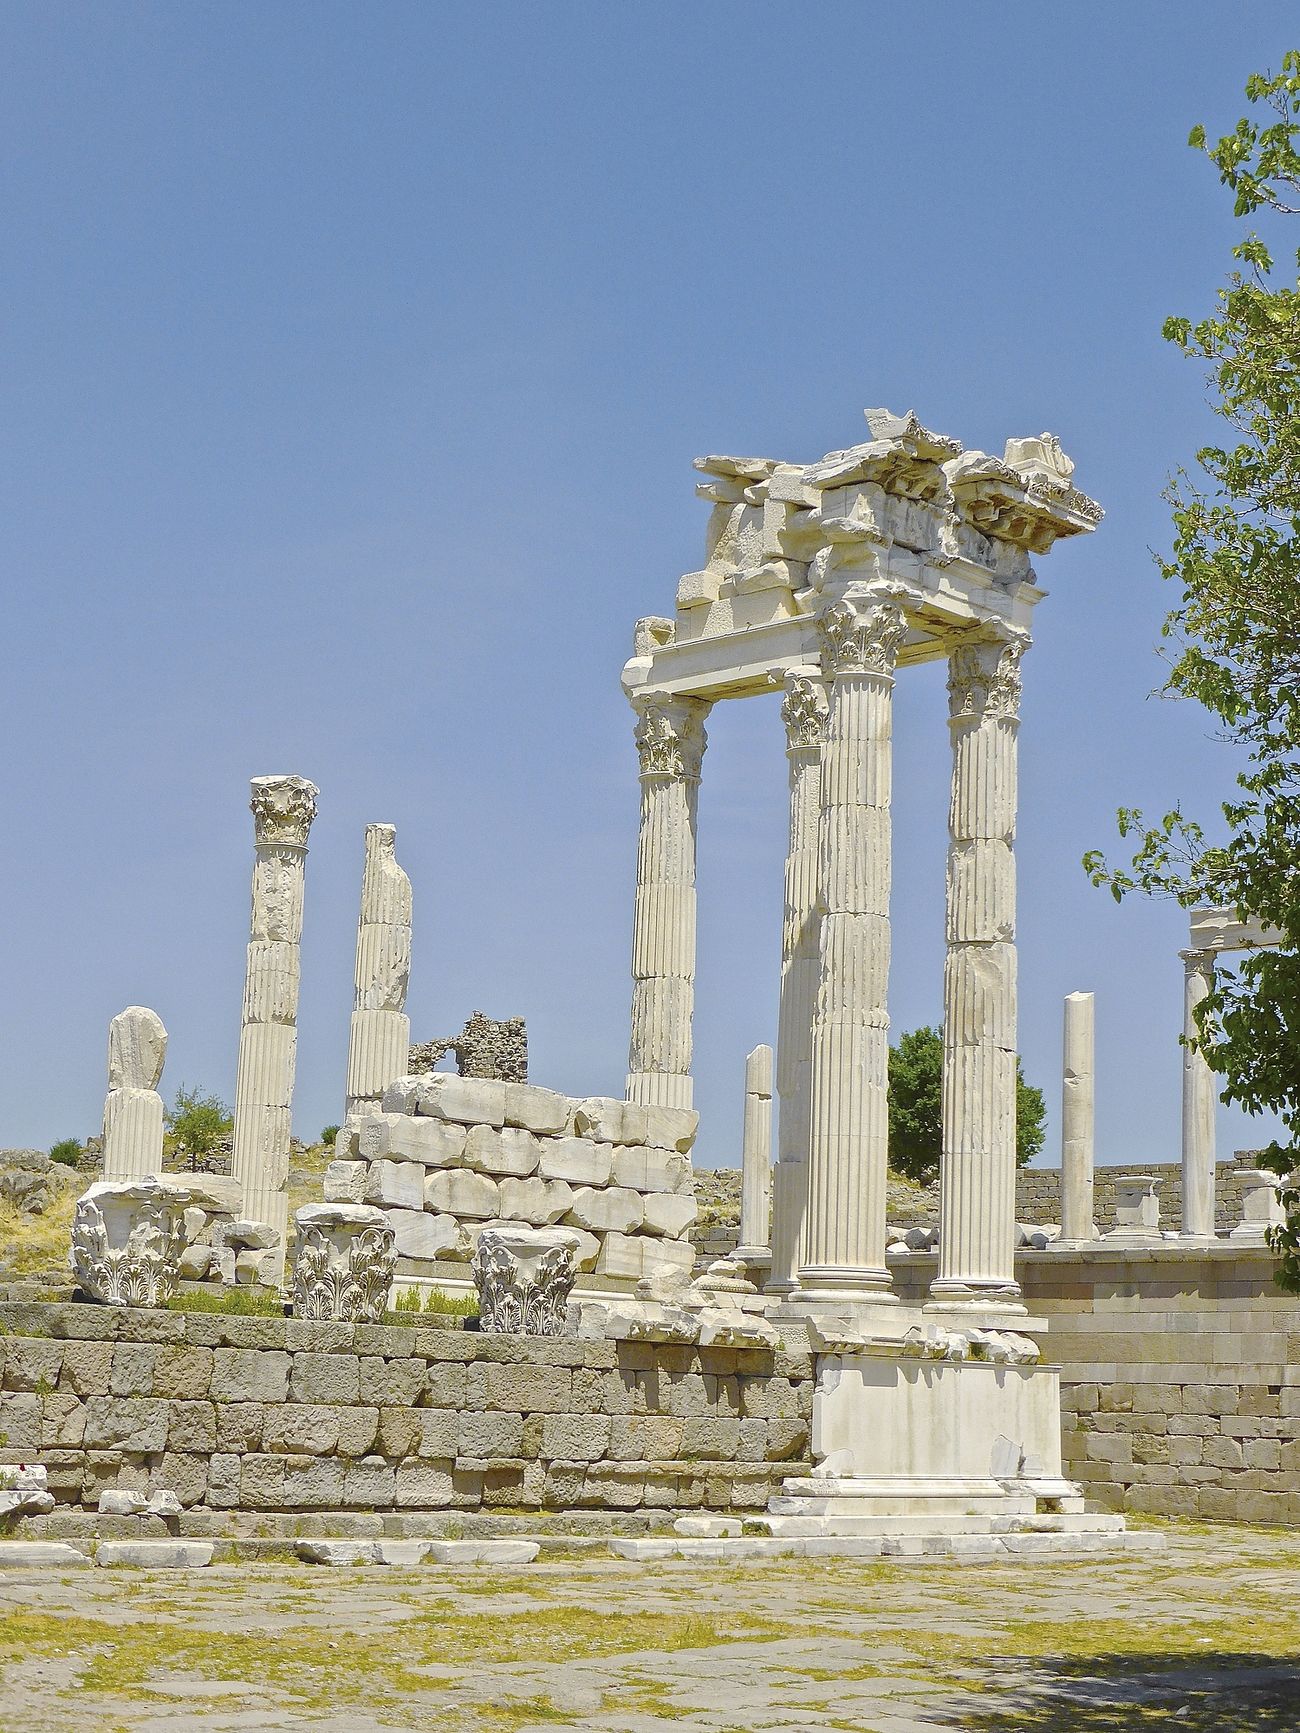 Ancient temple architecture with columns